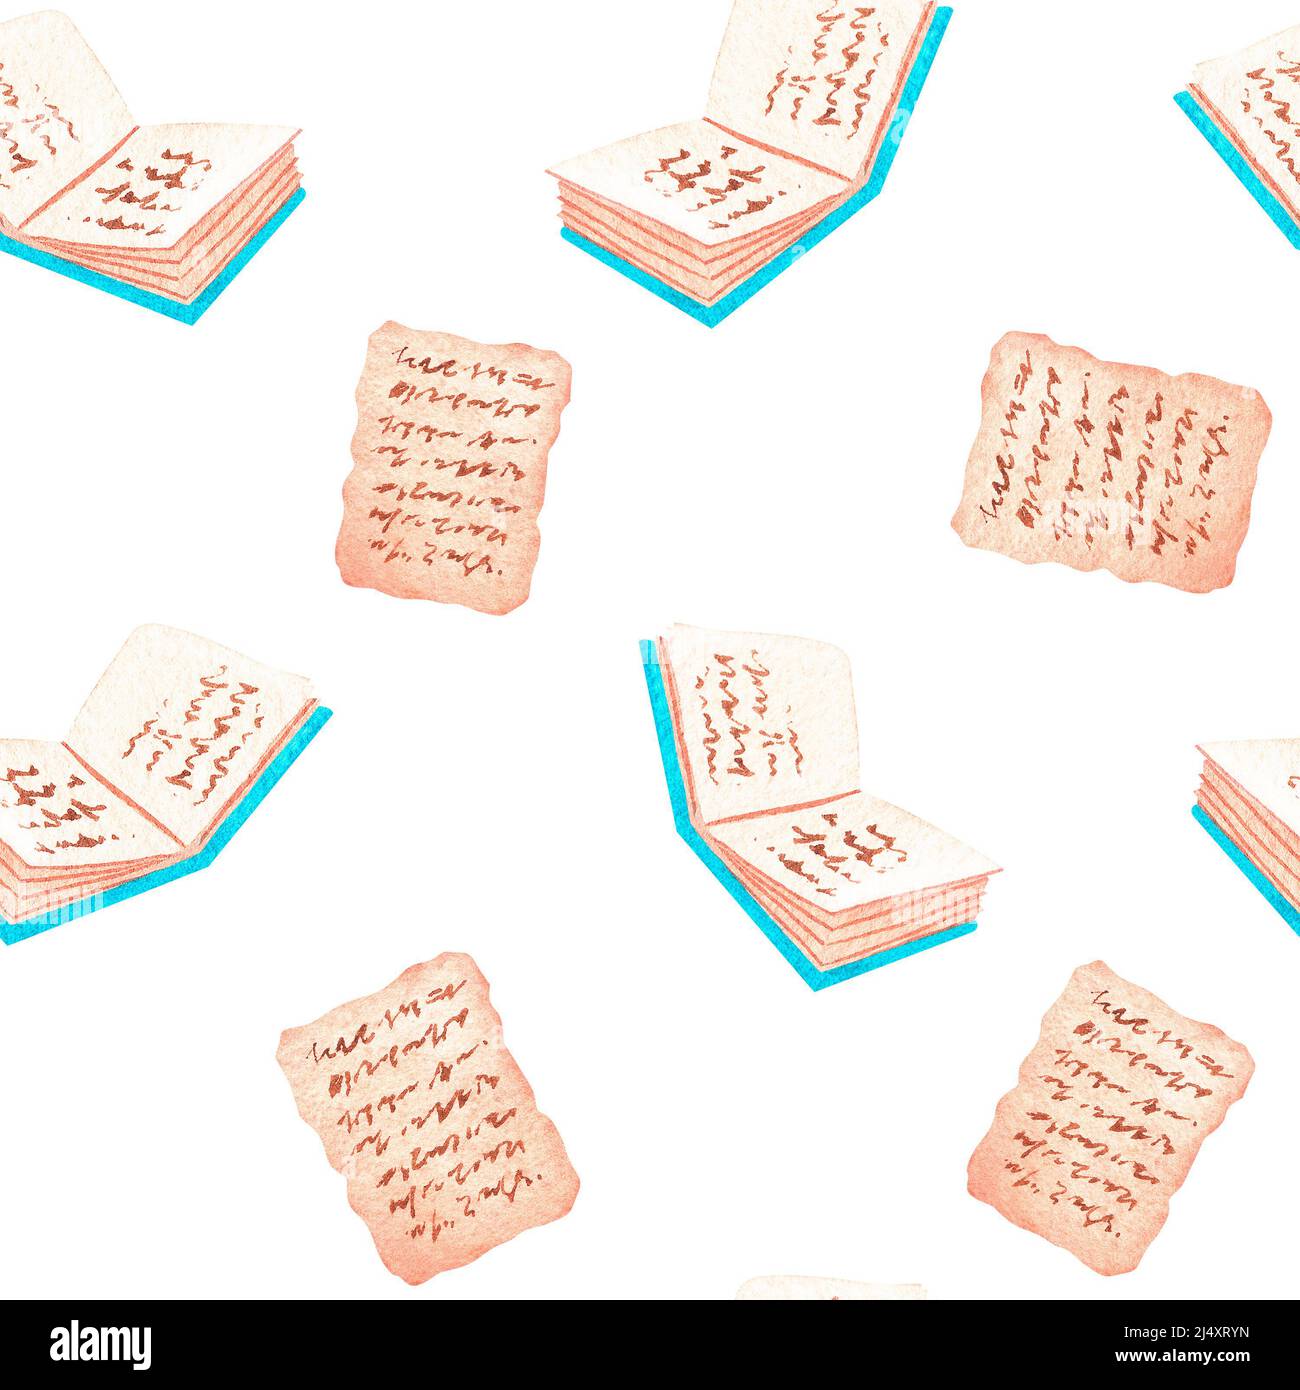 Book pages. Seamless pattern. Watercolor vintage illustration. Isolated on a white background. For your design. Stock Photo